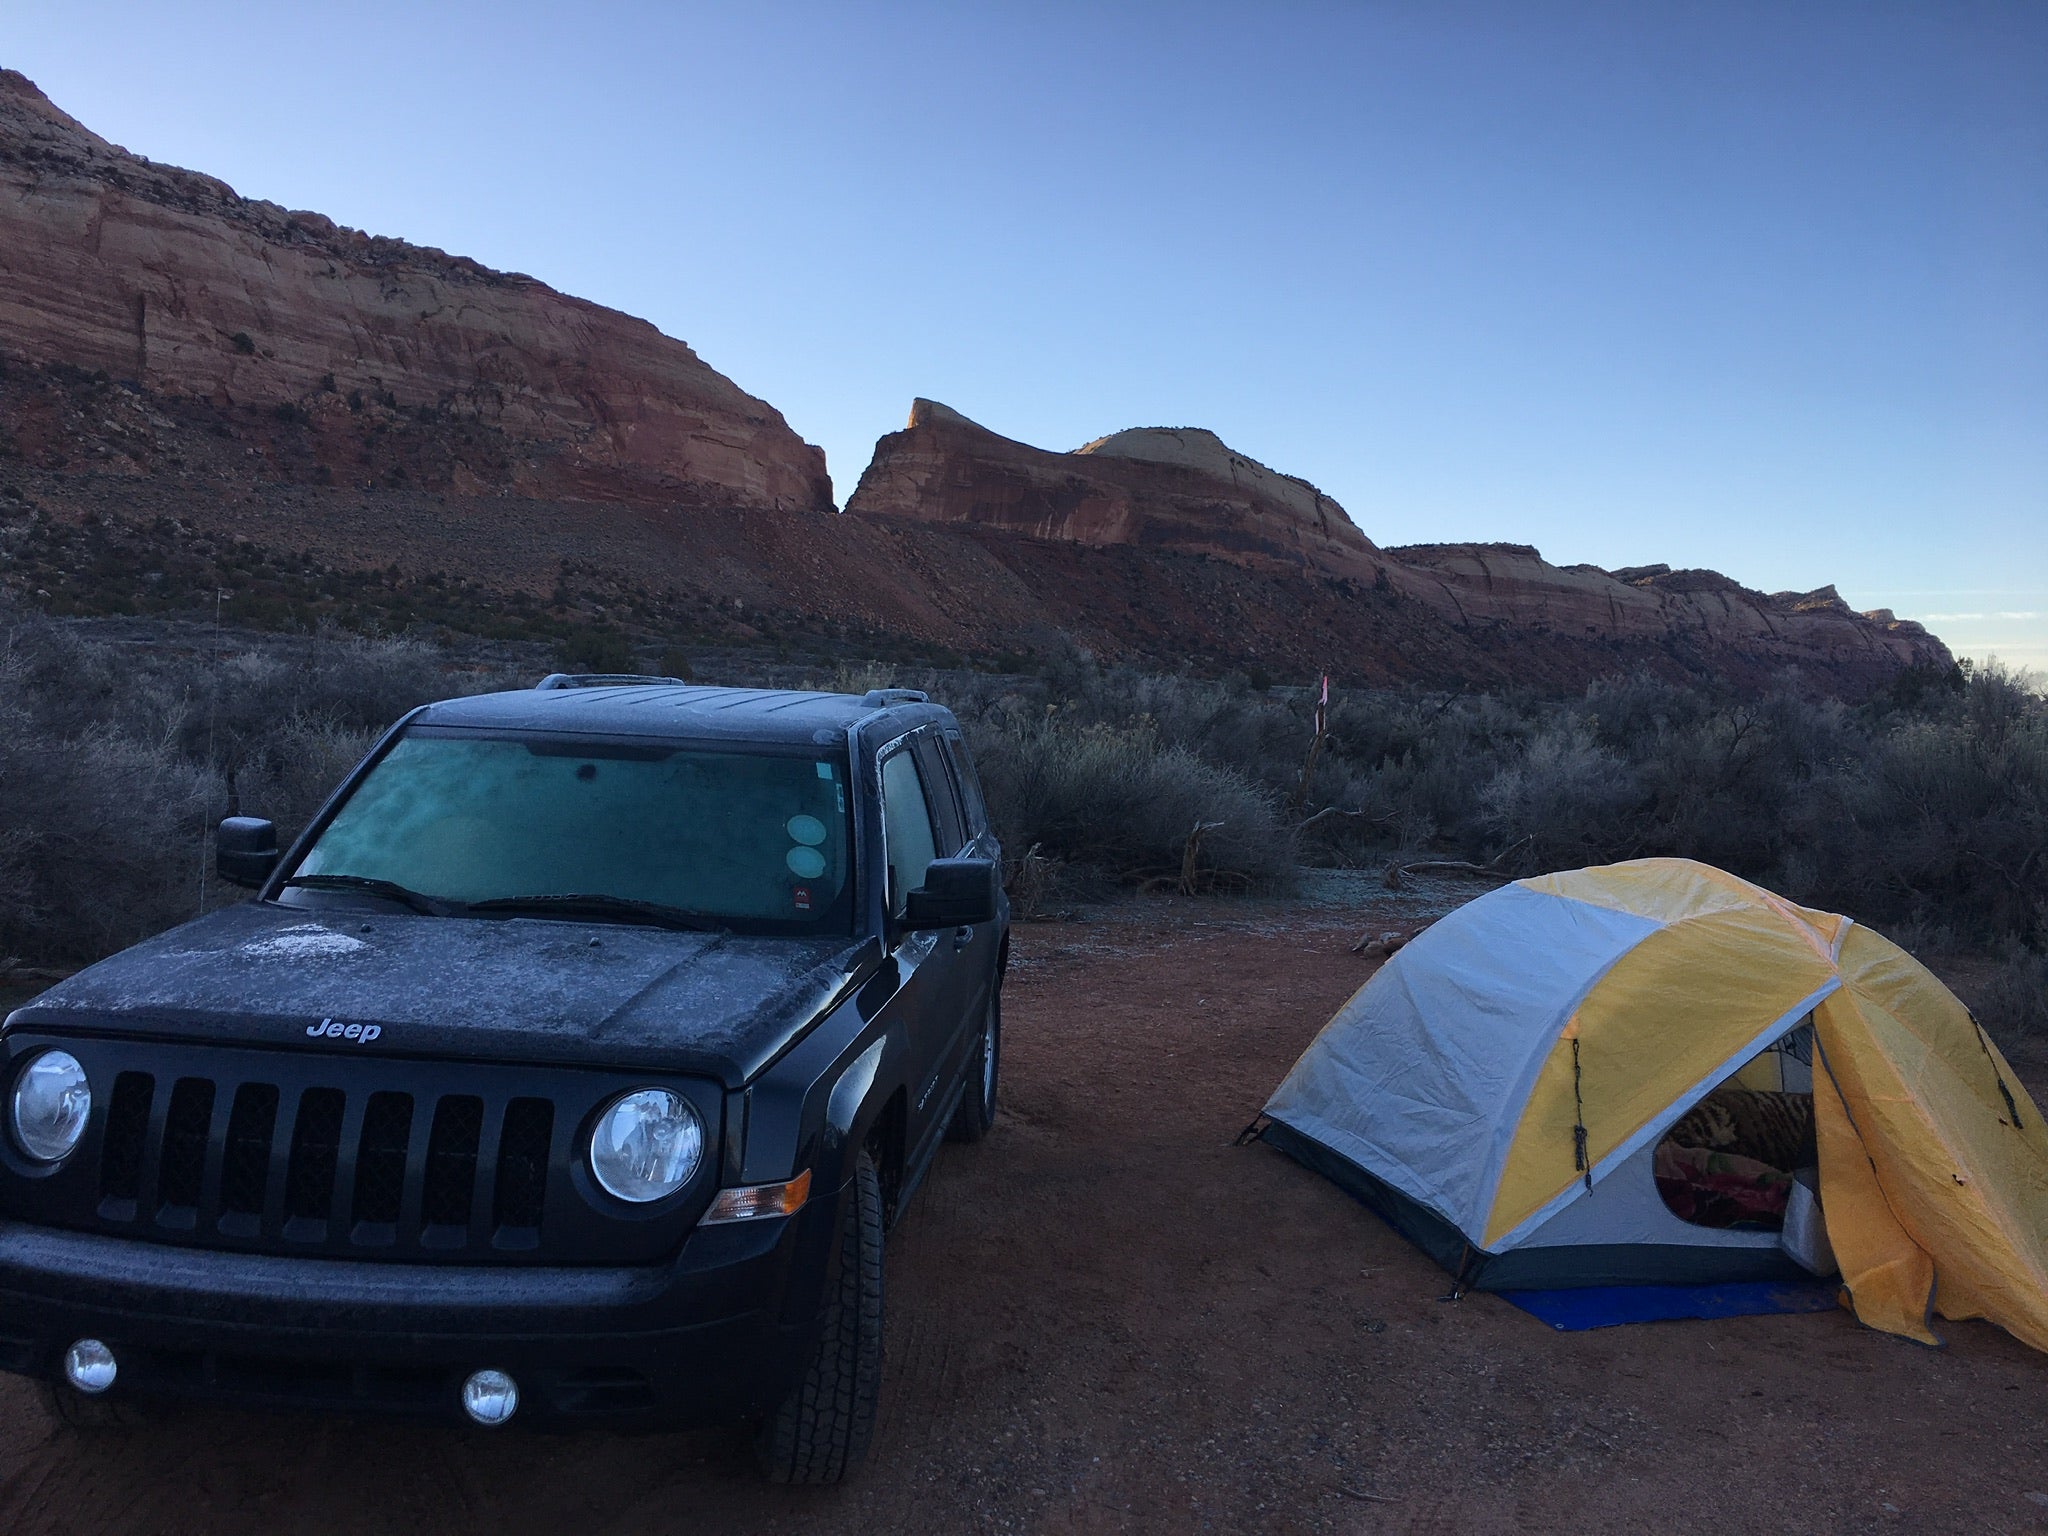 Camper submitted image from Comb Wash Dispersed Camping Area - 5